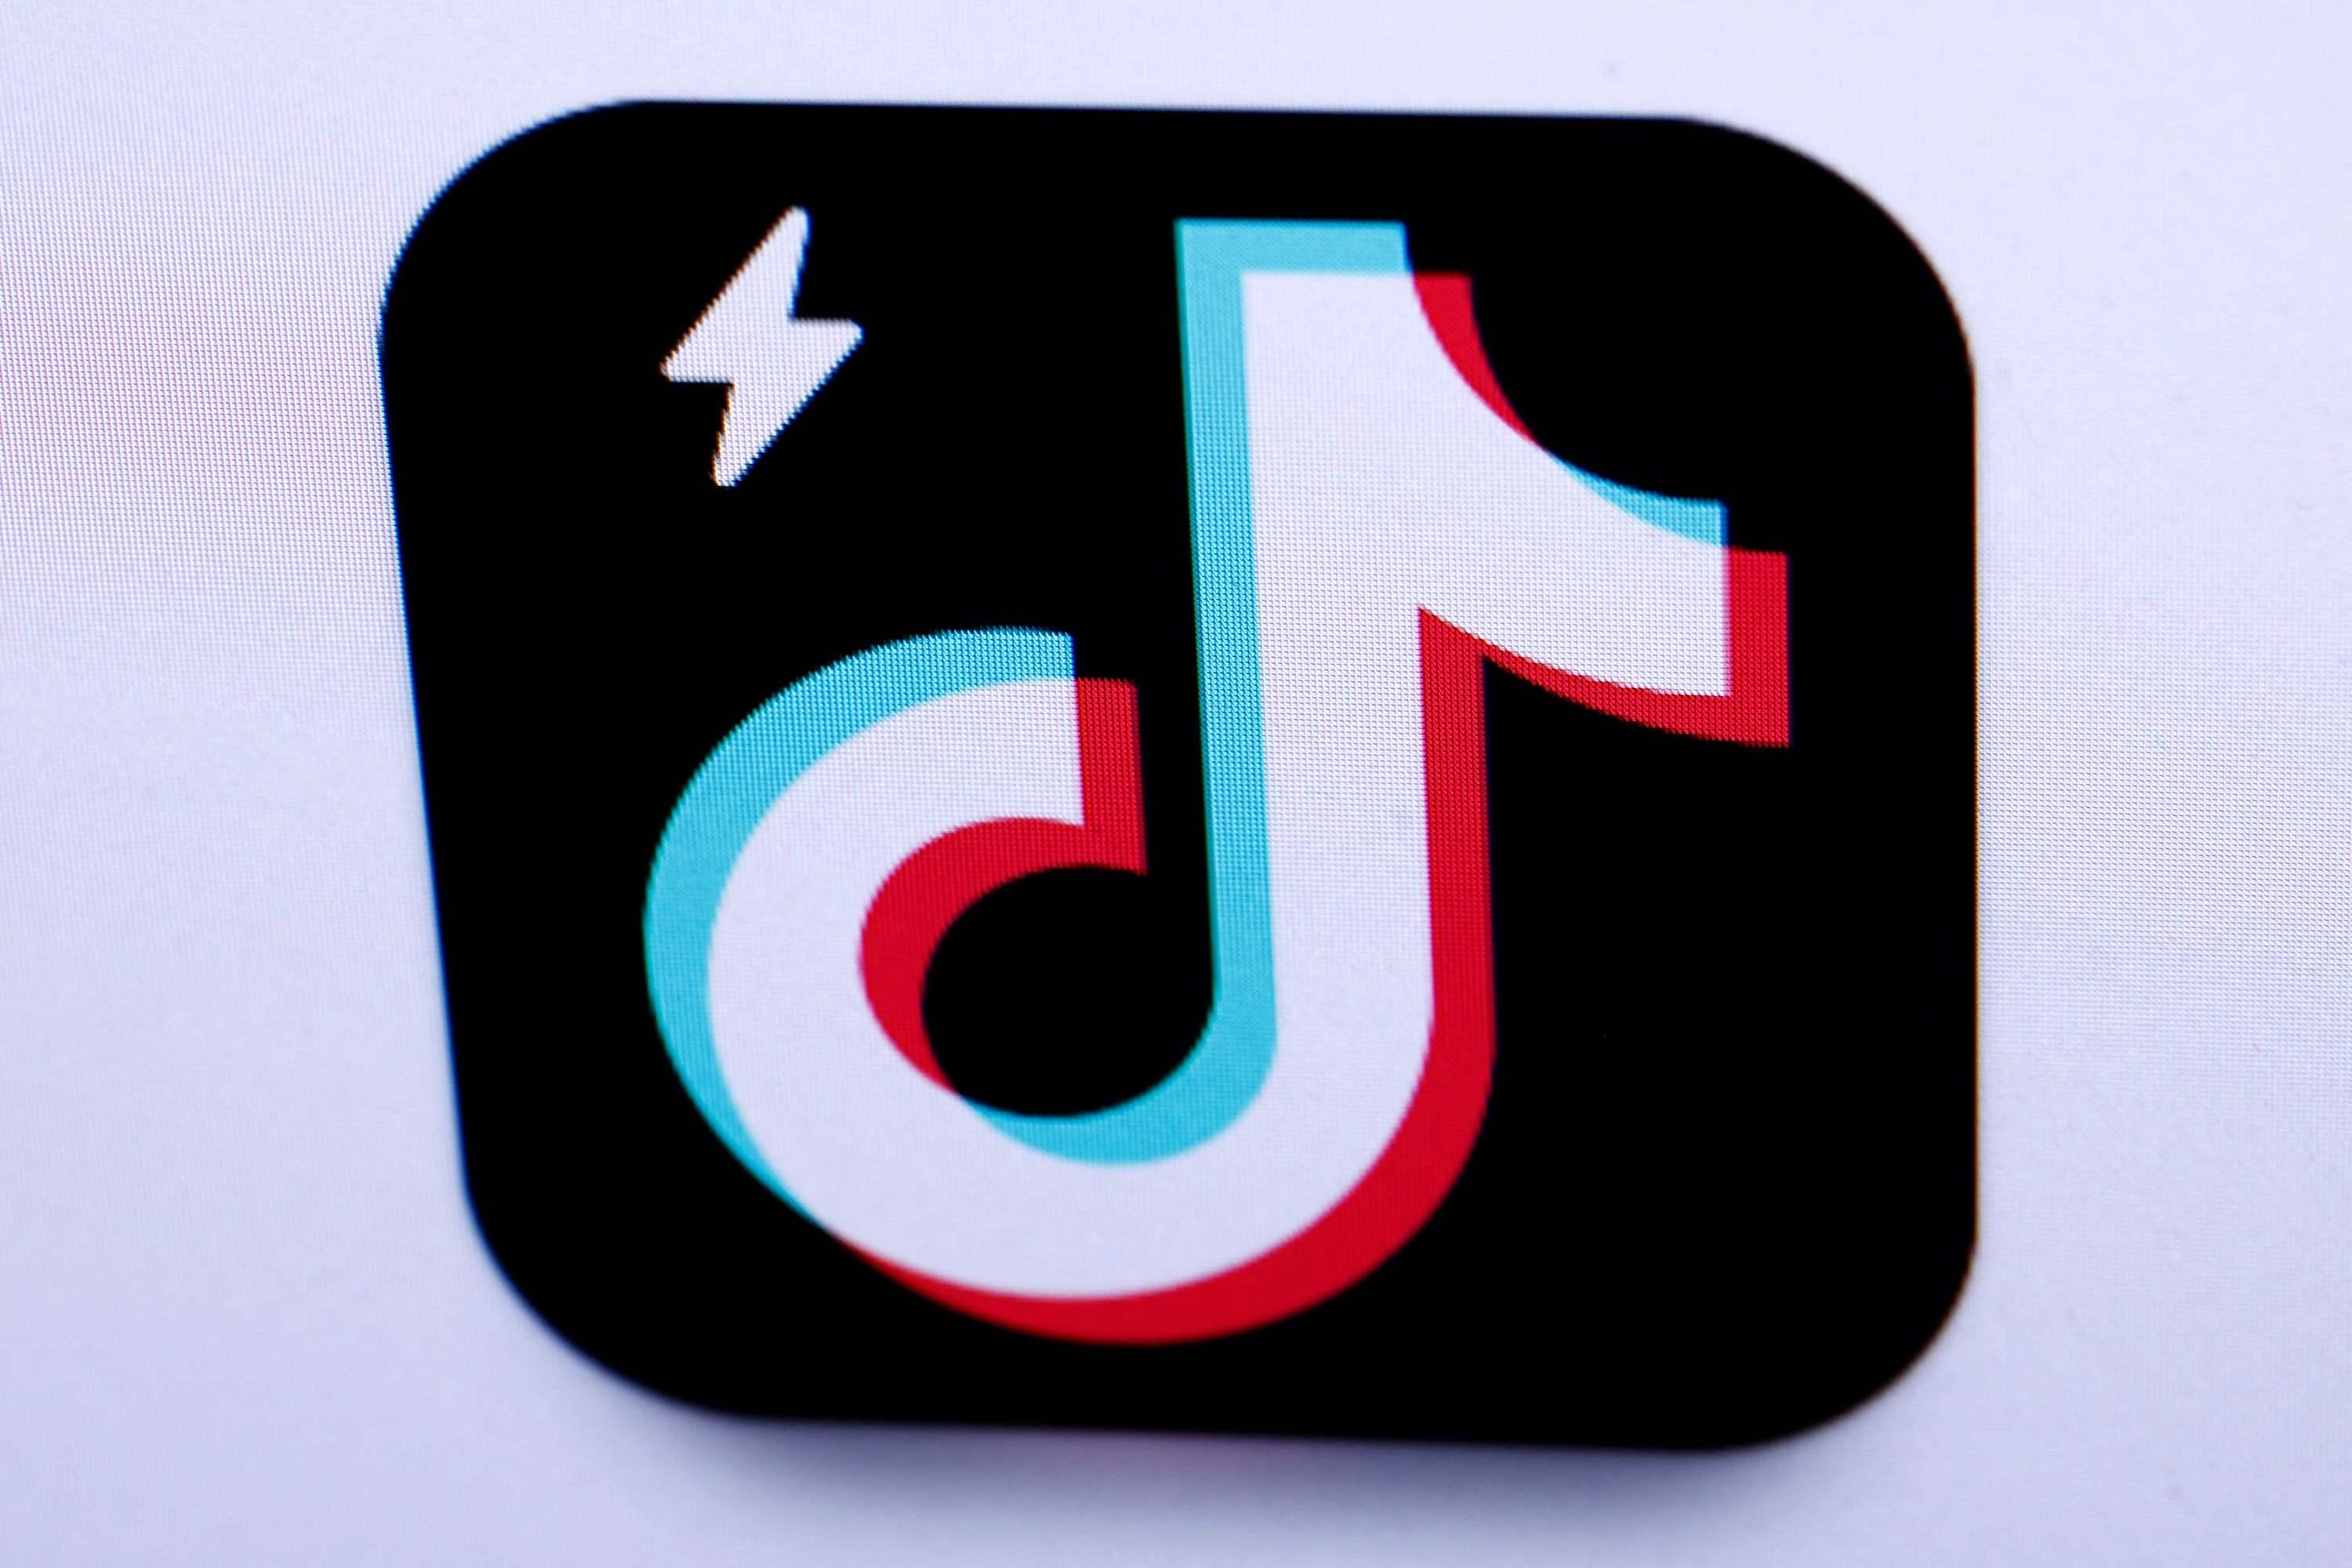 The controversial TikTok Lite application enters the sights of the European Commission